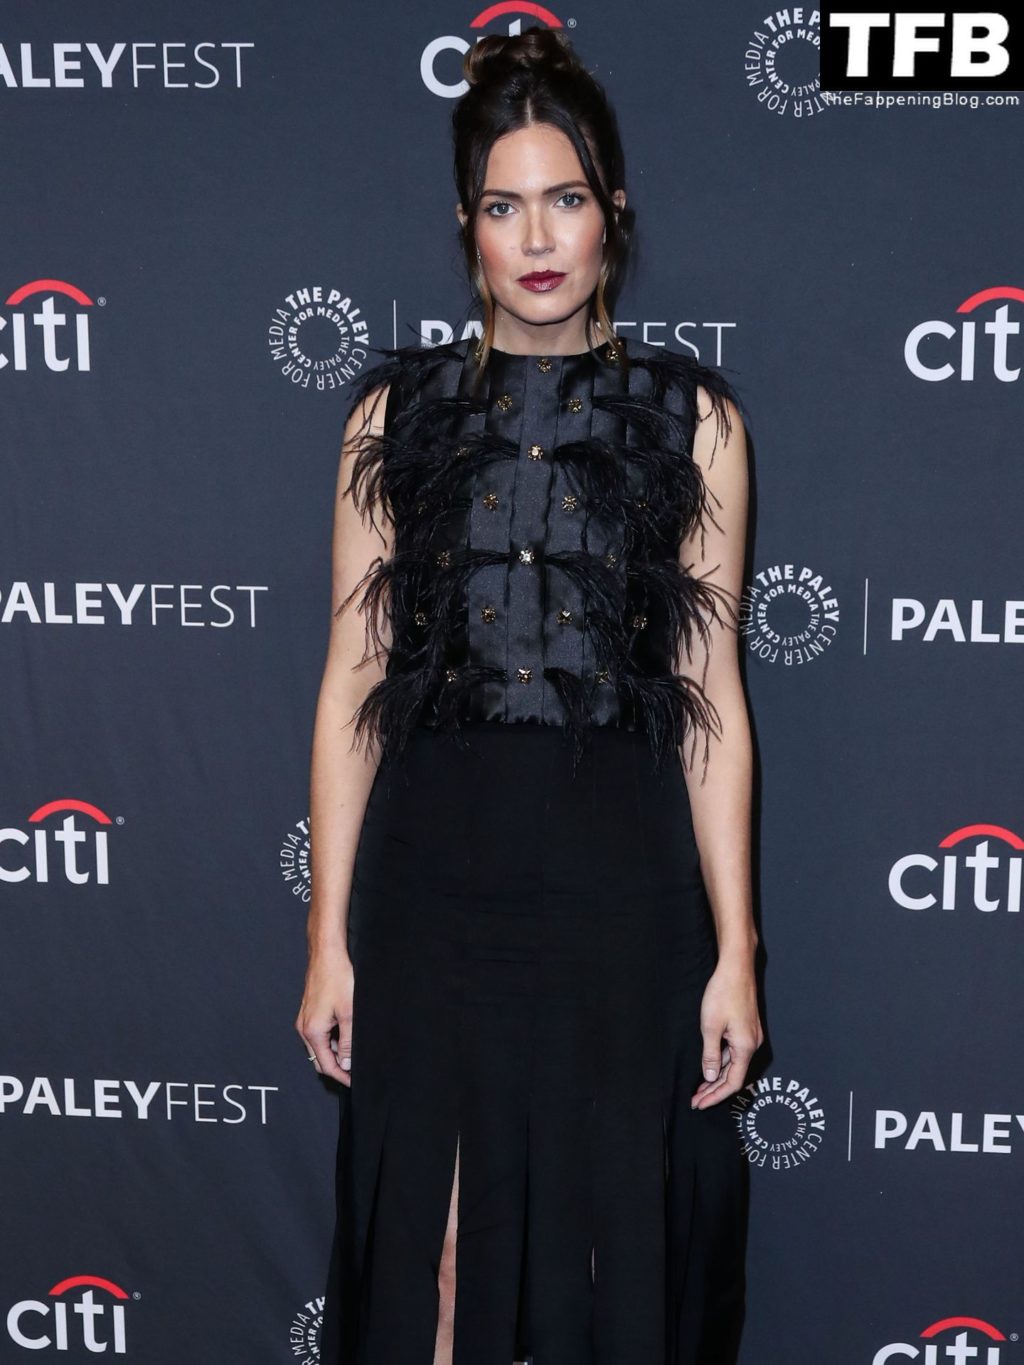 Mandy Moore Looks Hot at the 2022 PaleyFest LA (83 Photos)